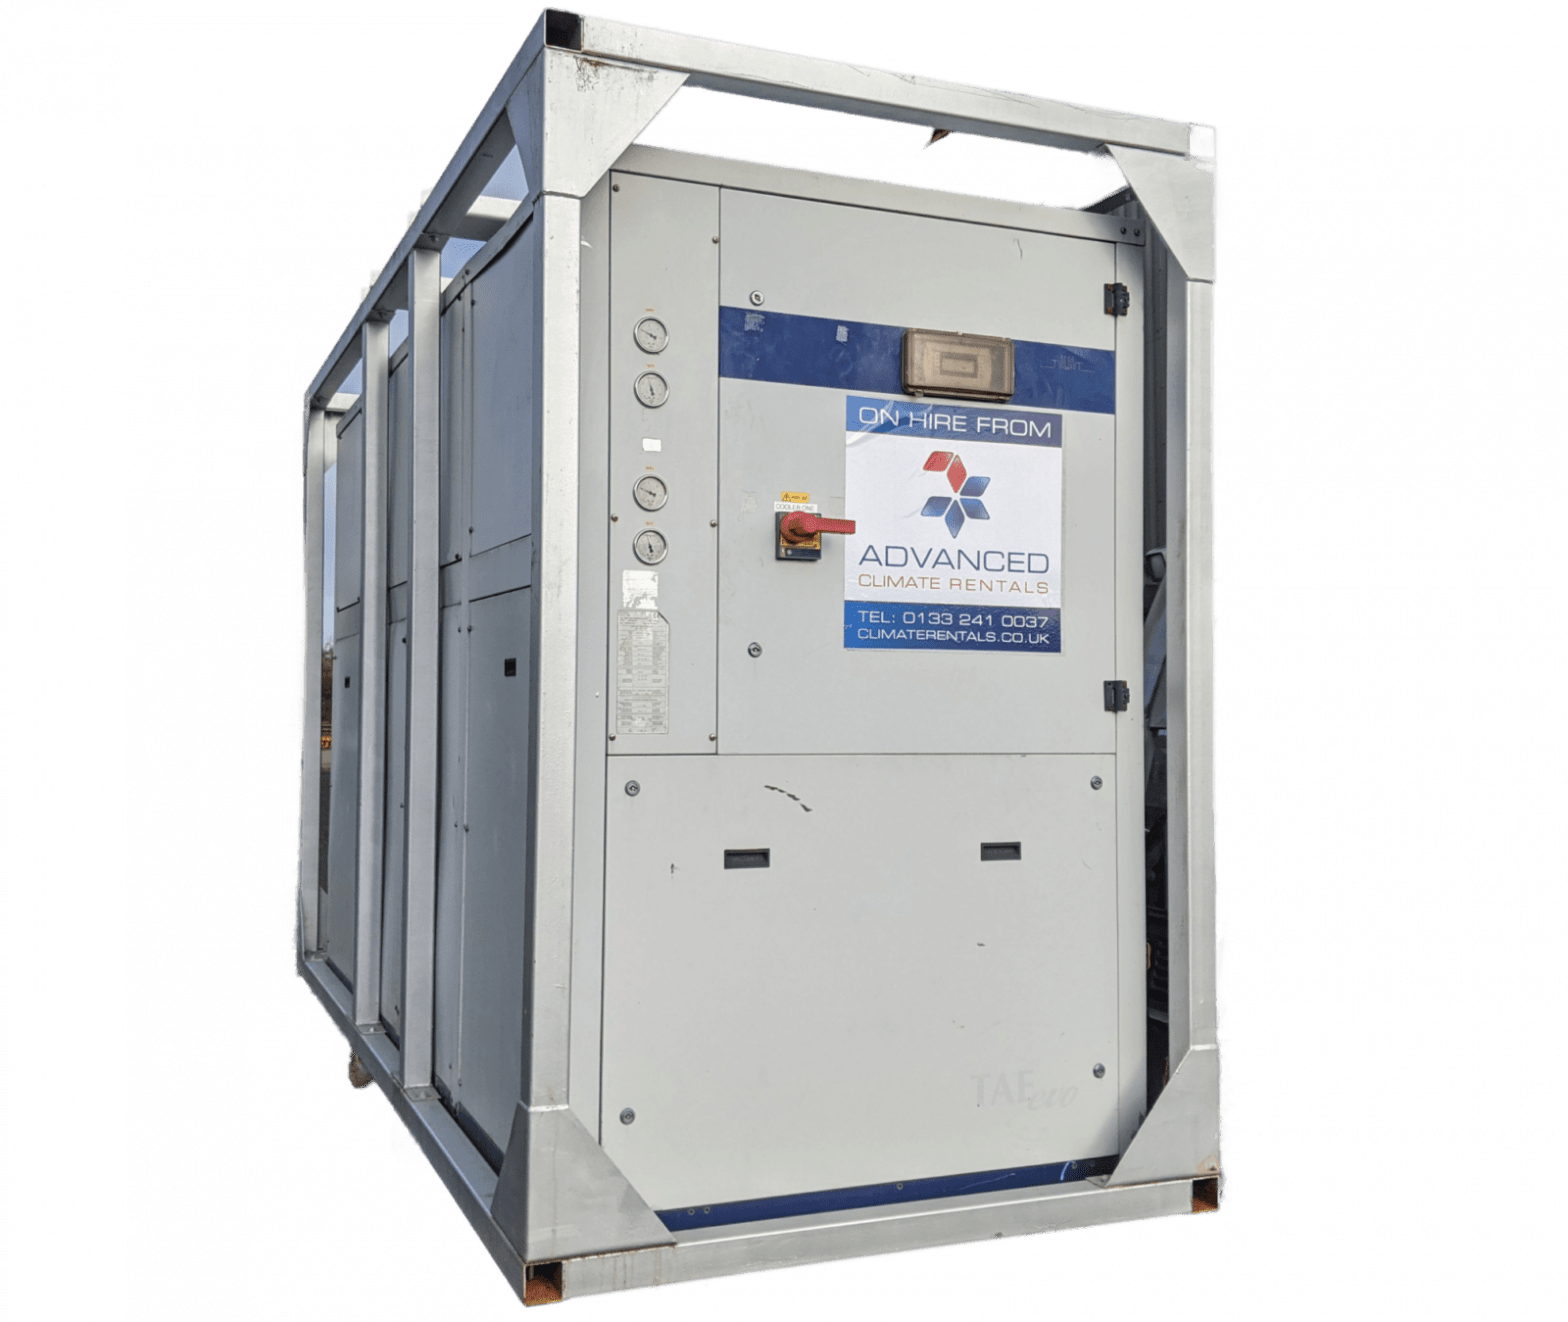 150kw Chiller Unit Hire (Packaged)